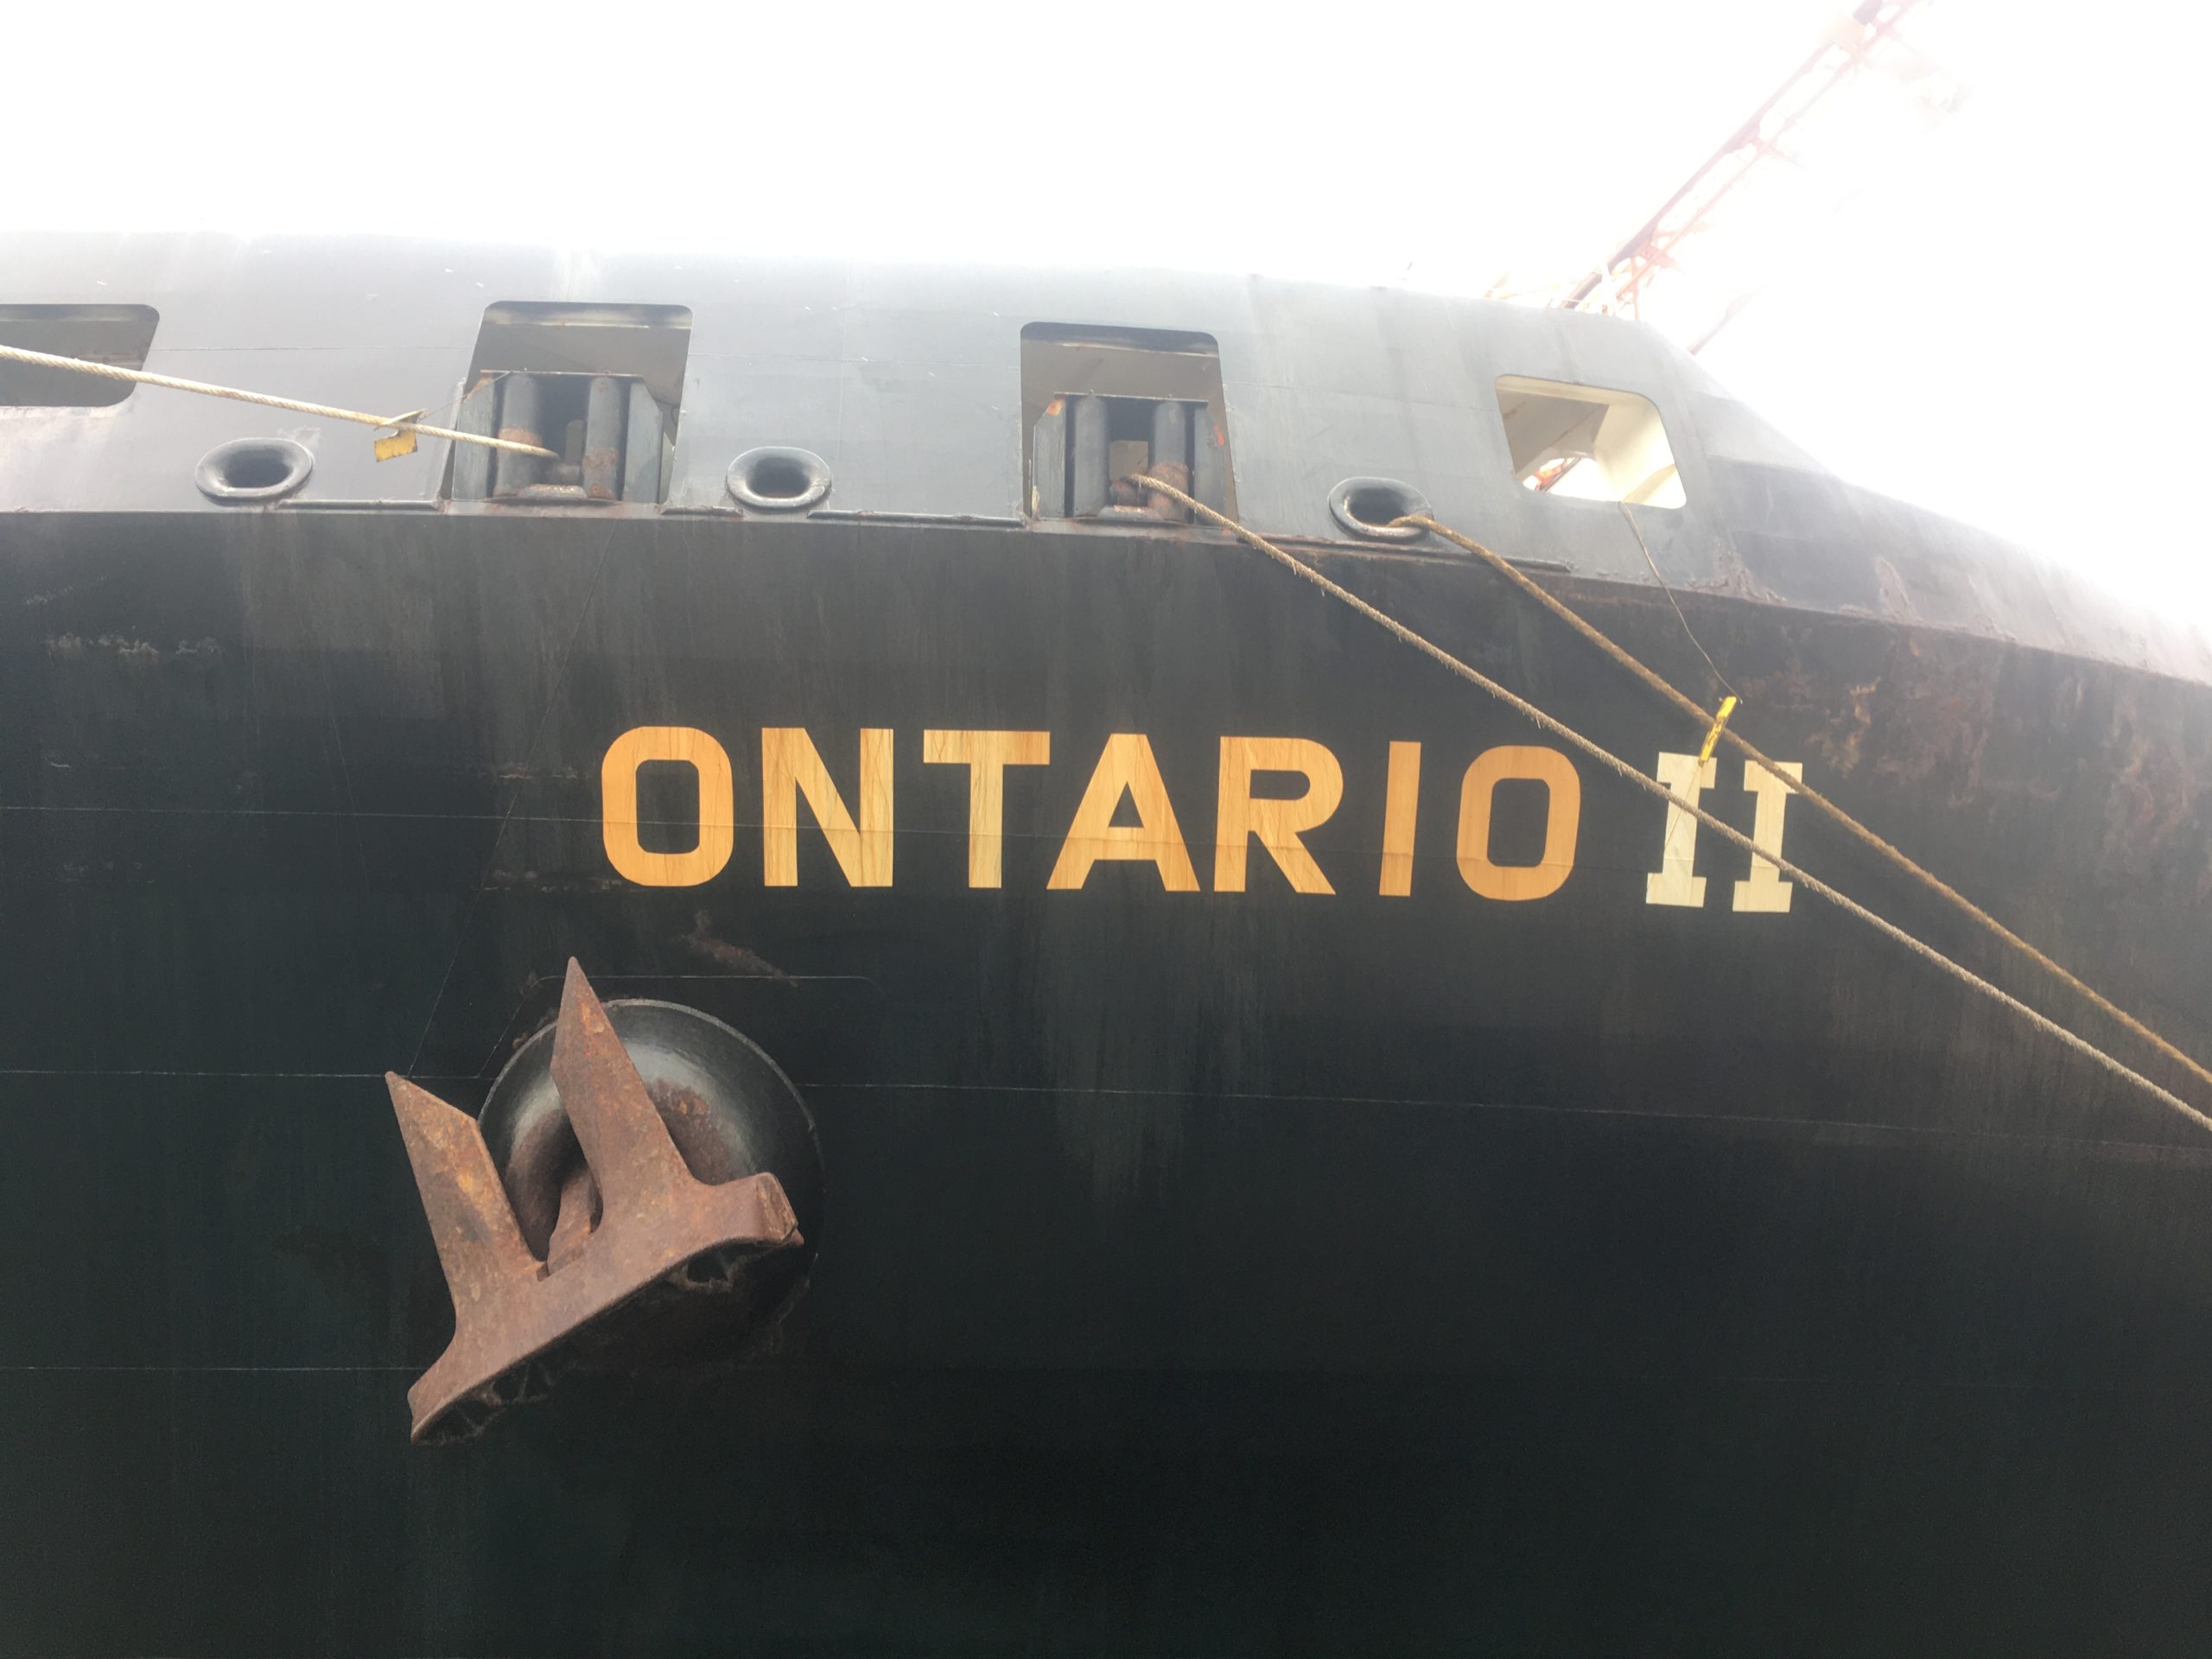 Ontario II - chartered by CGM CMA - possibly